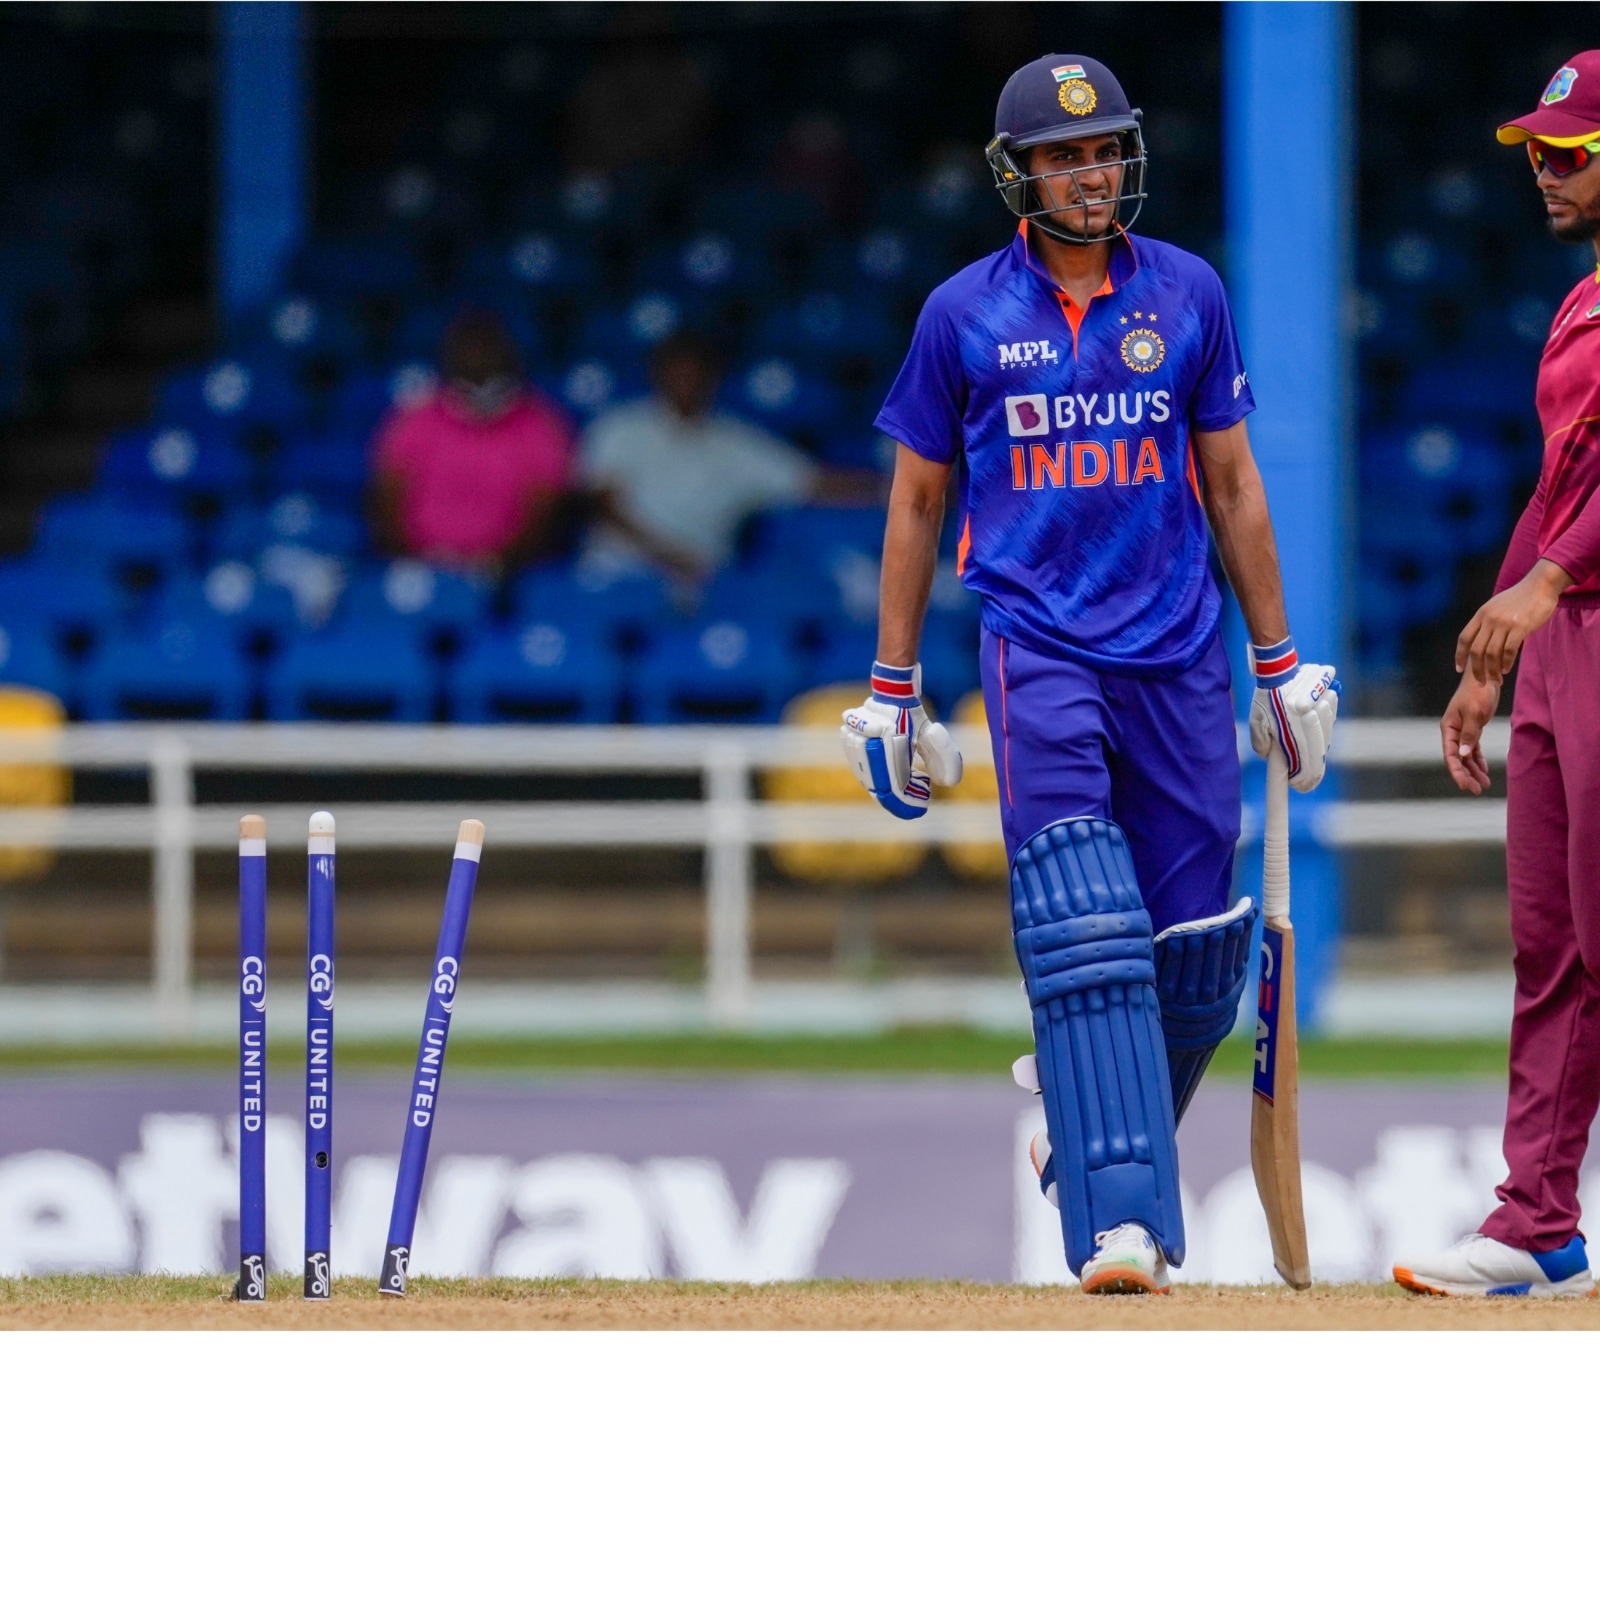 India vs West Indies Live Streaming Cricket When and Where to Watch IND vs WI 2nd ODI Live Coverage on Live TV Online